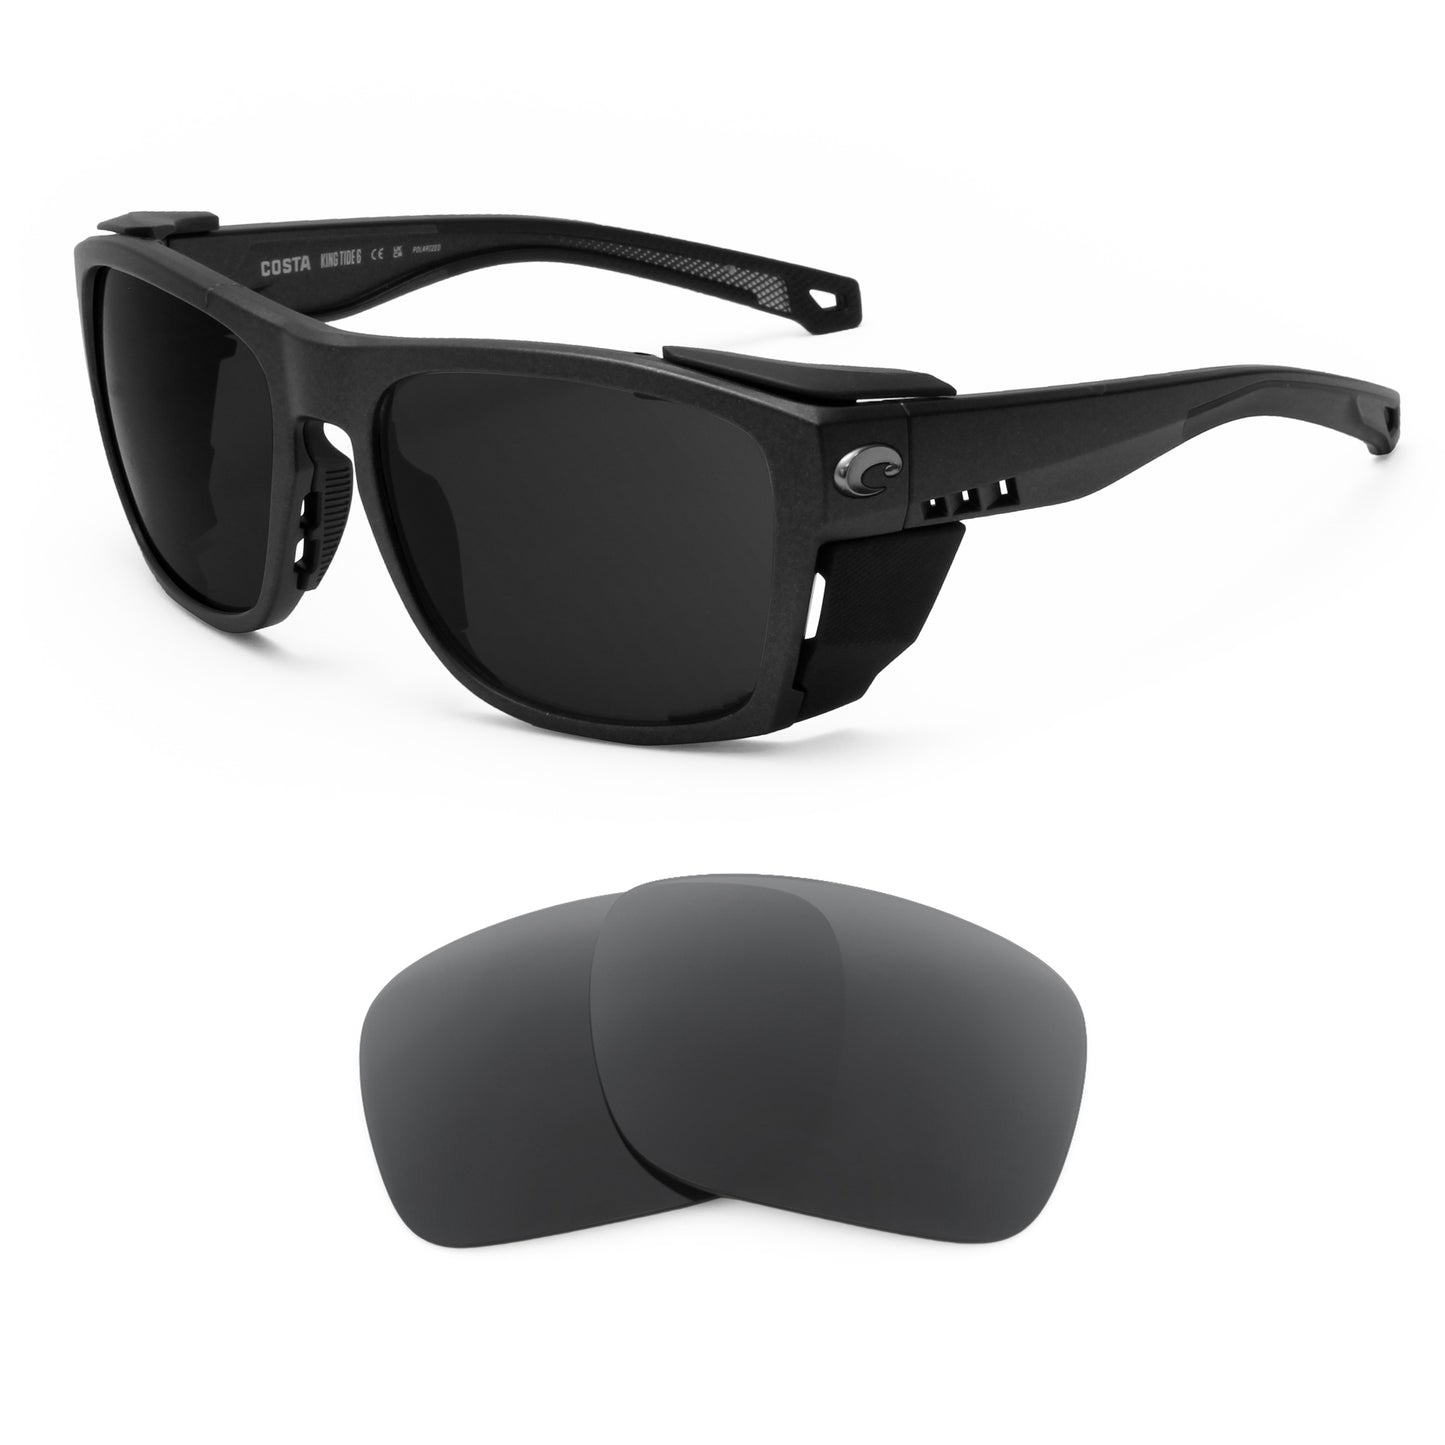 Costa King Tide 6 sunglasses with replacement lenses